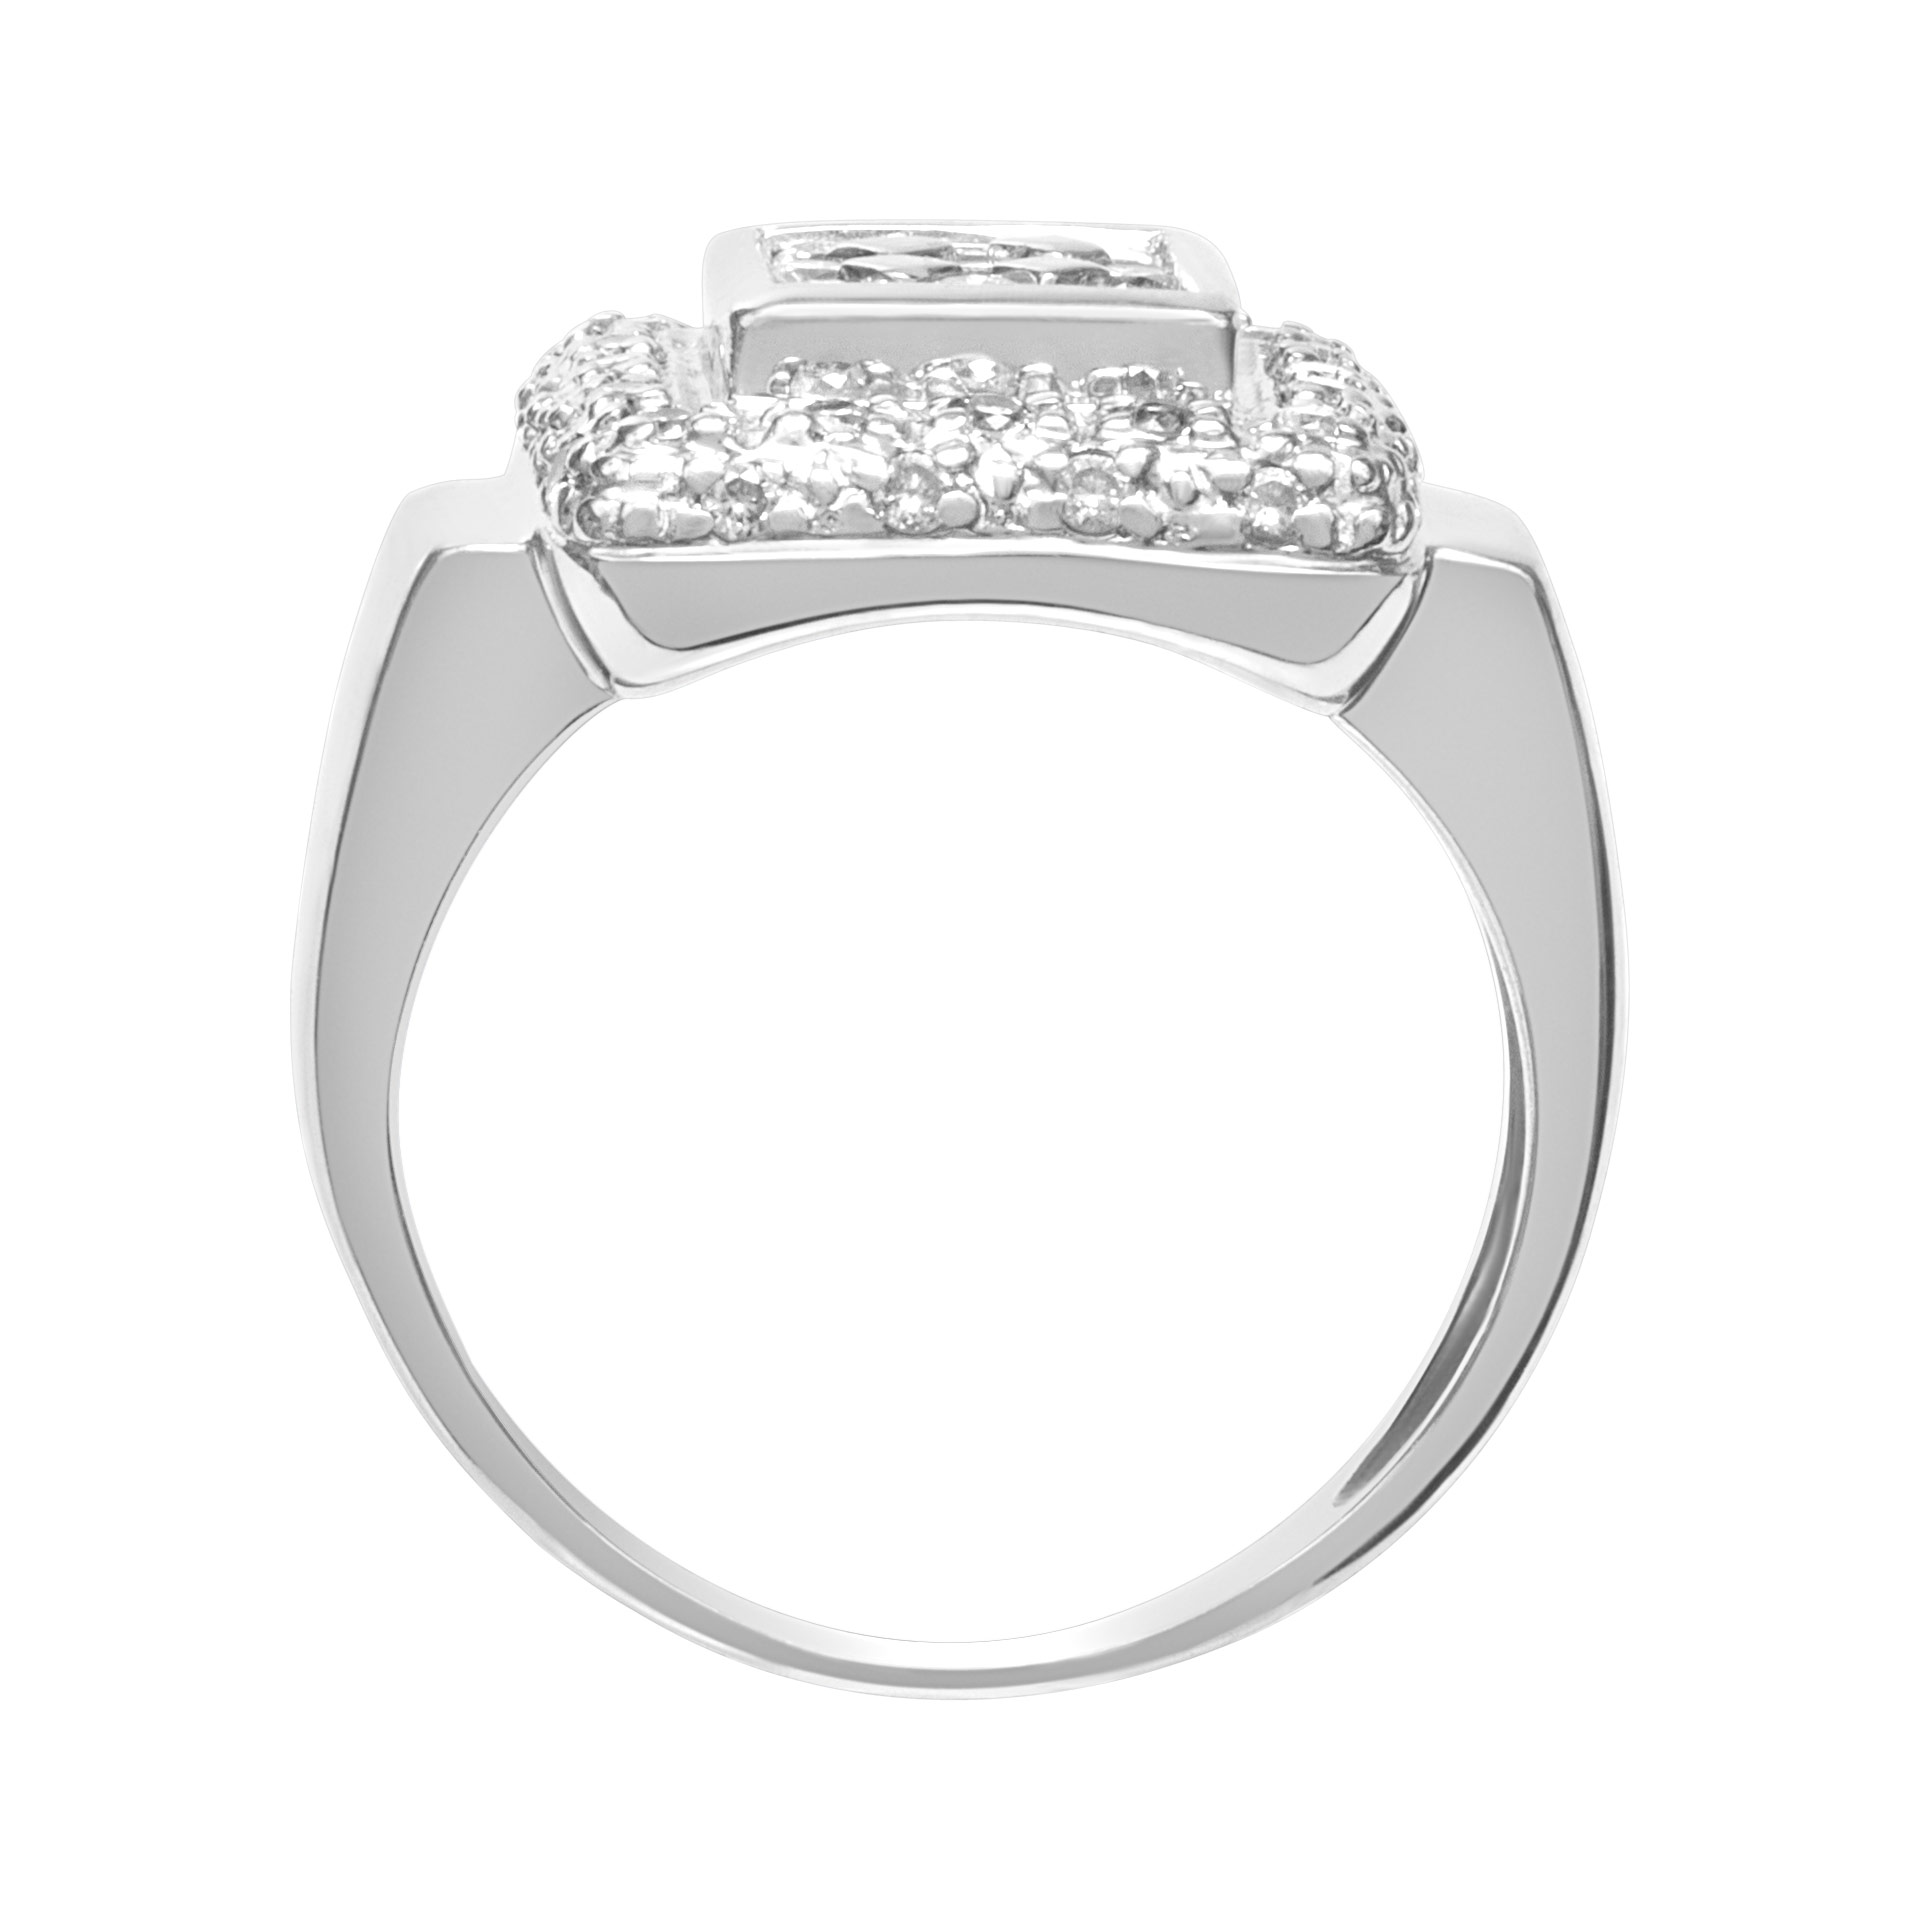 Modern style diamond ring in 18k white gold. 0.50 carats in clean white diamonds image 3